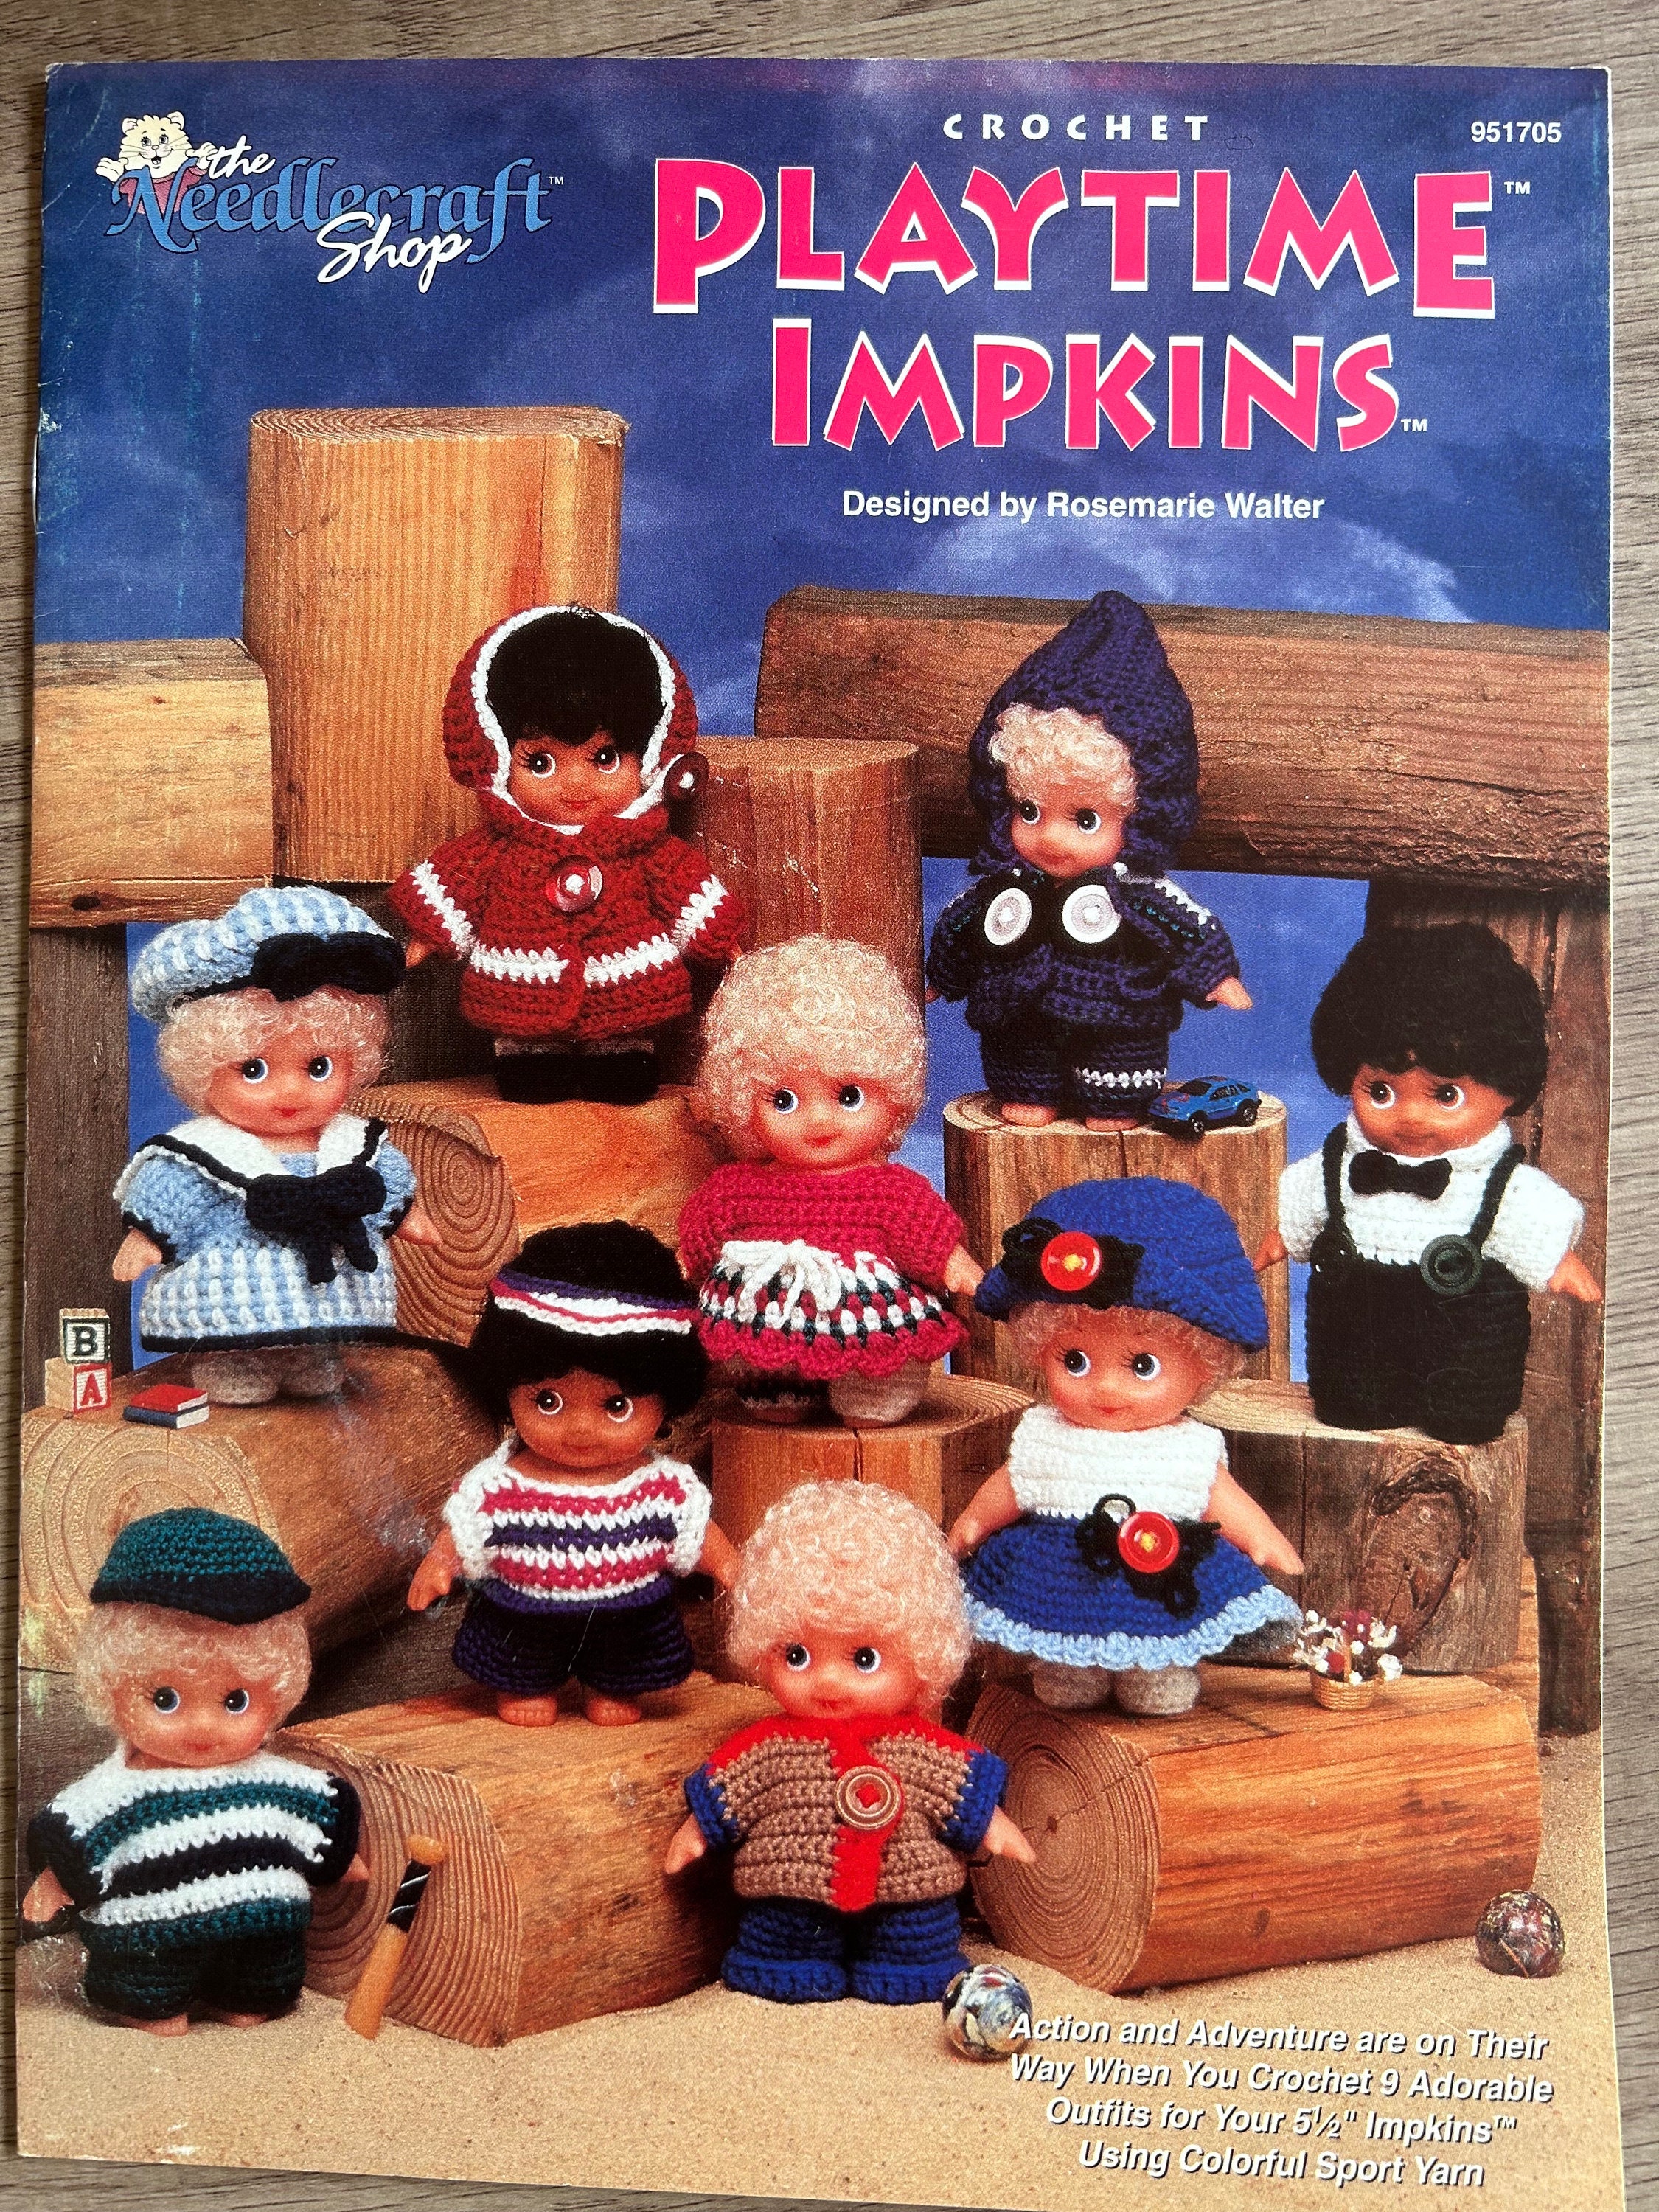 CROCHET PLAYTIME IMPKINS Outfits Needlecraft Shop 9 Outfits to Crochet 